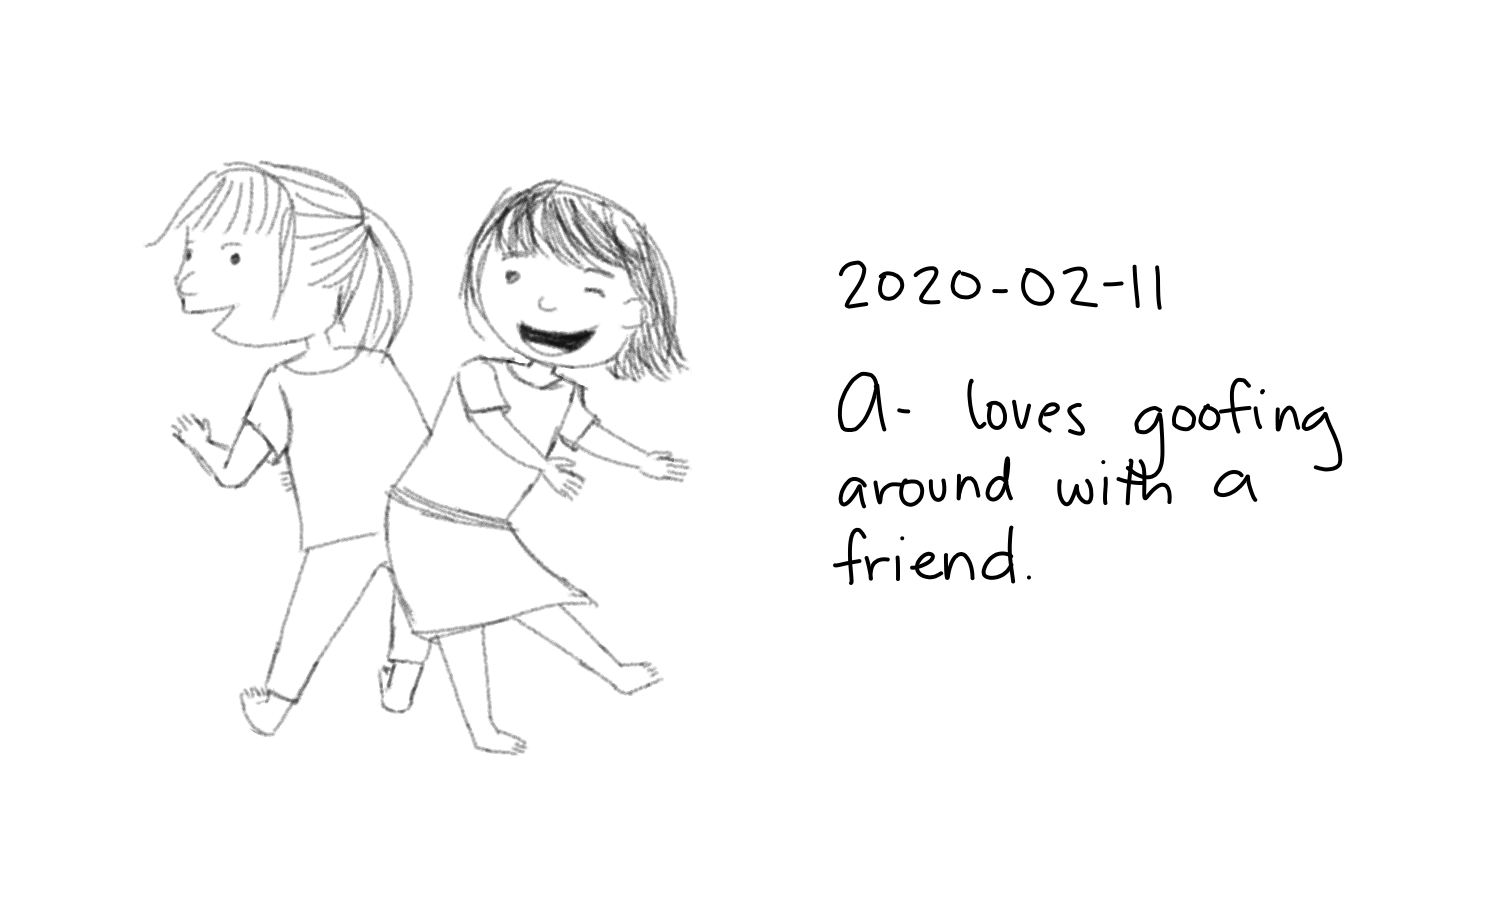 2020-02-11 A- loves goofing around with a friend. #moment #sketch.png